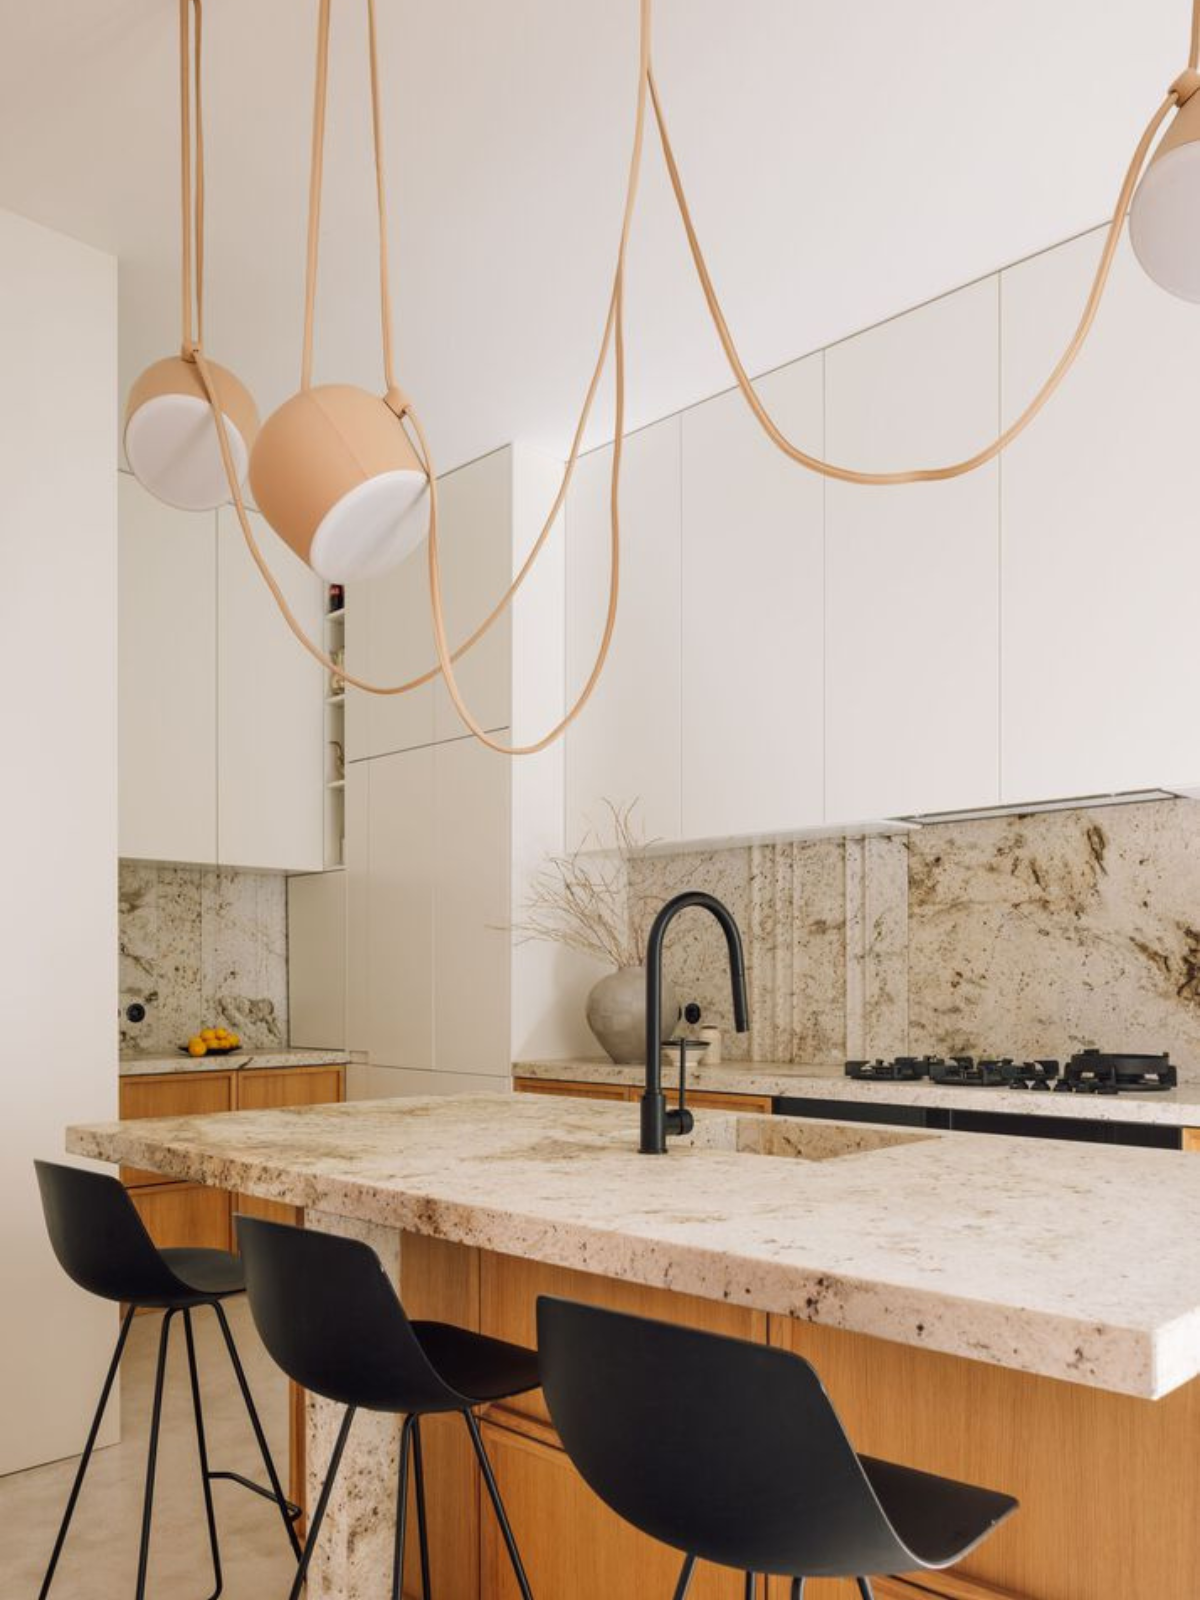 kitchen showing white cabinets, black bar stool, island counter and hanging decorative pendant lights